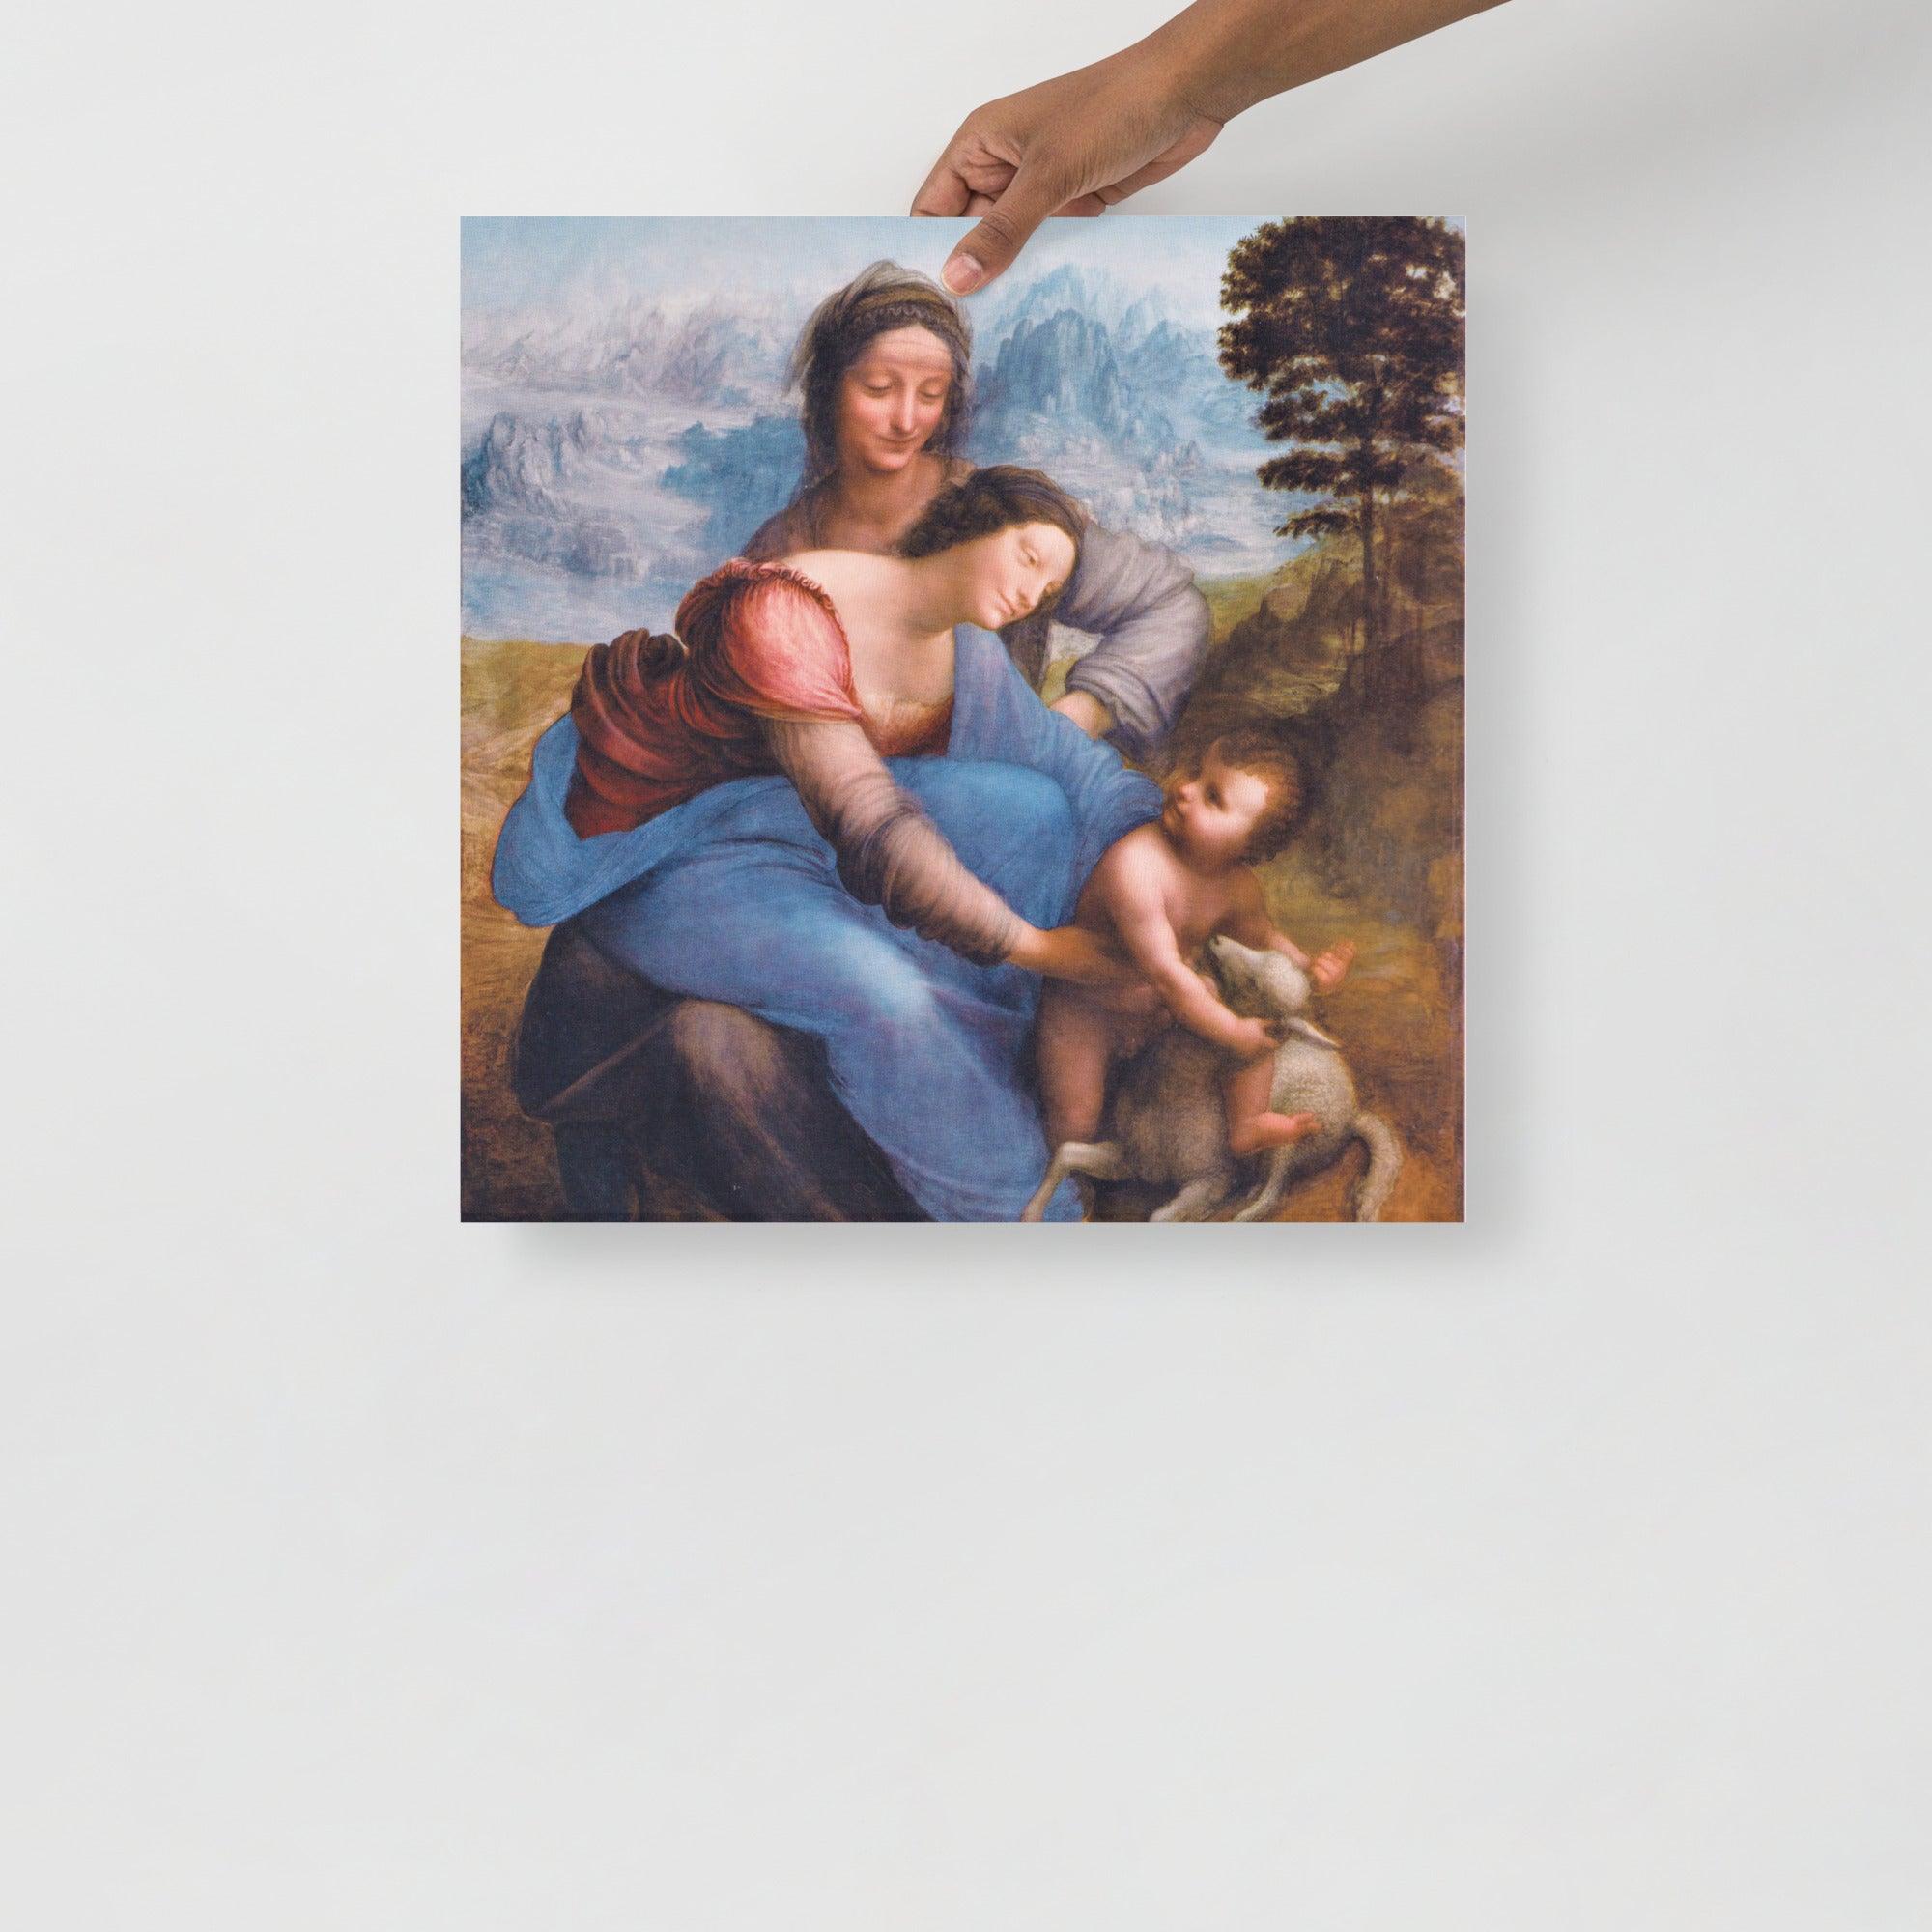 The Virgin and Child with Saint Anne by Leonardo da Vinci poster on a plain backdrop in size 18x18”.